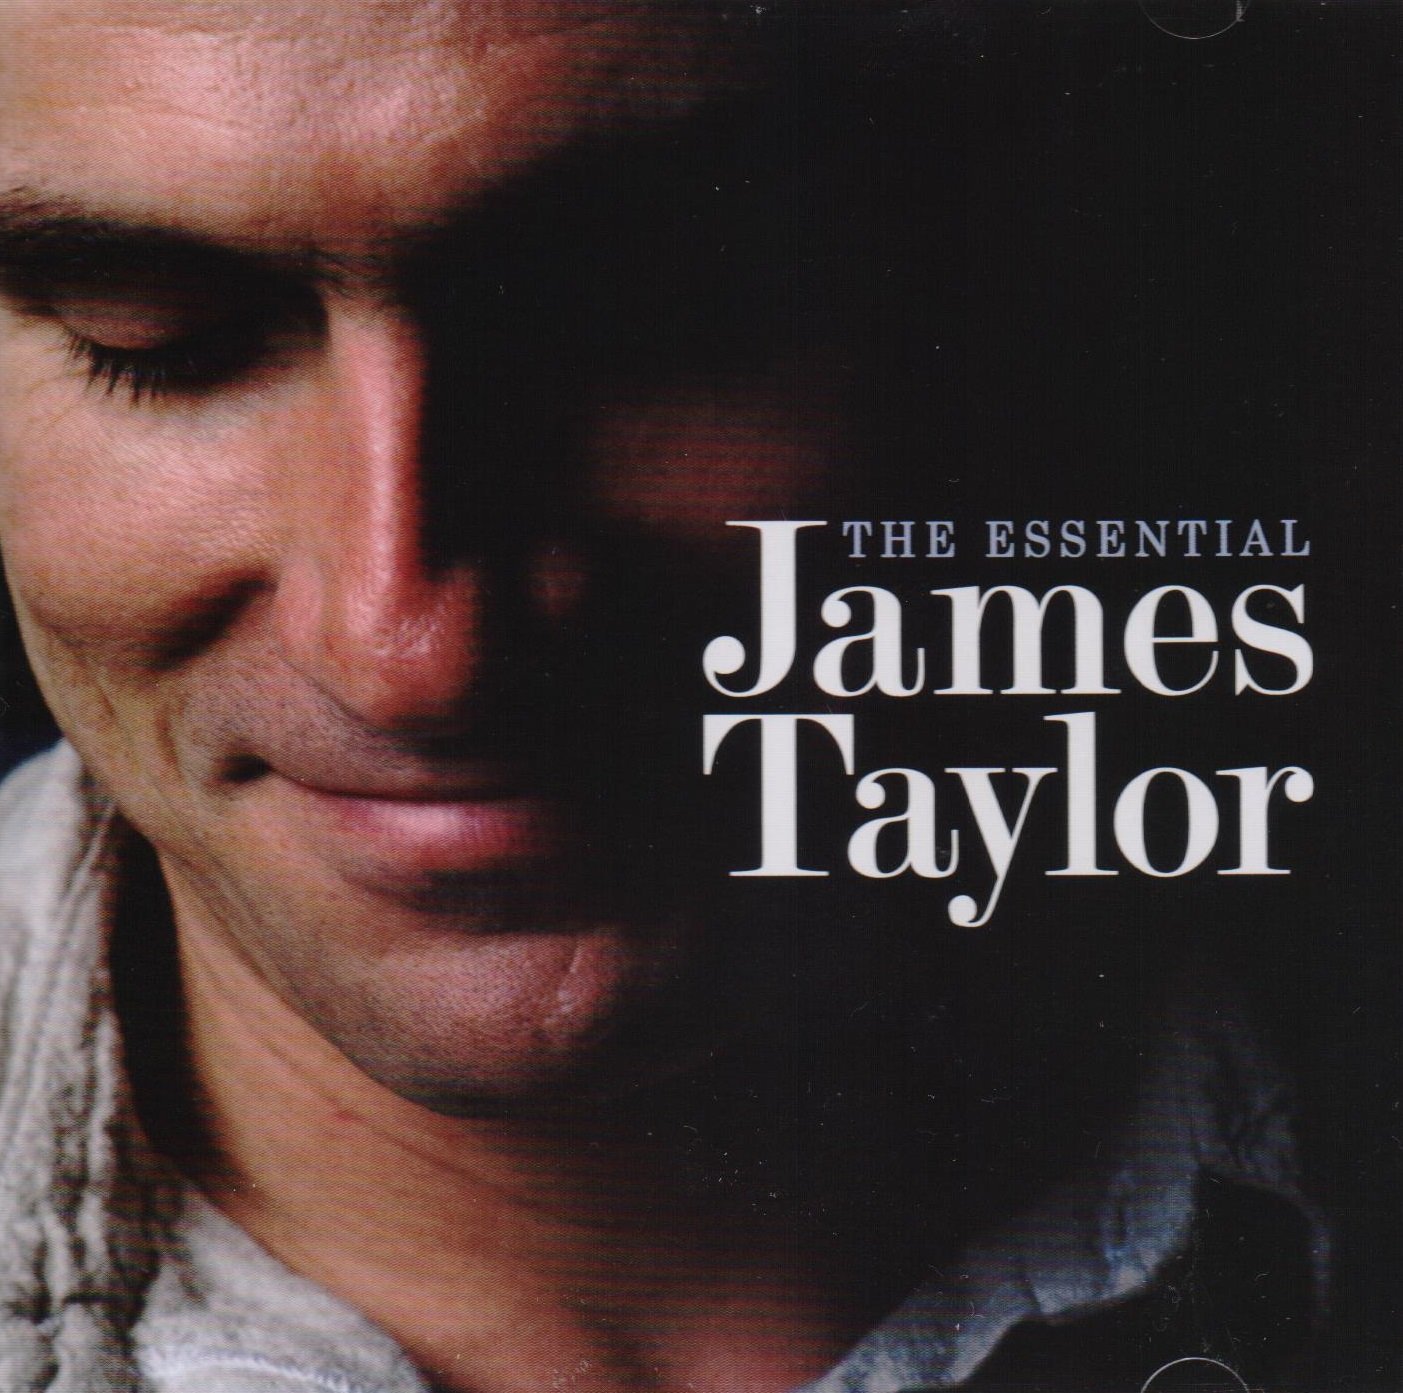 THE ESSENTIAL JAMES TAYLOR - 2 CD